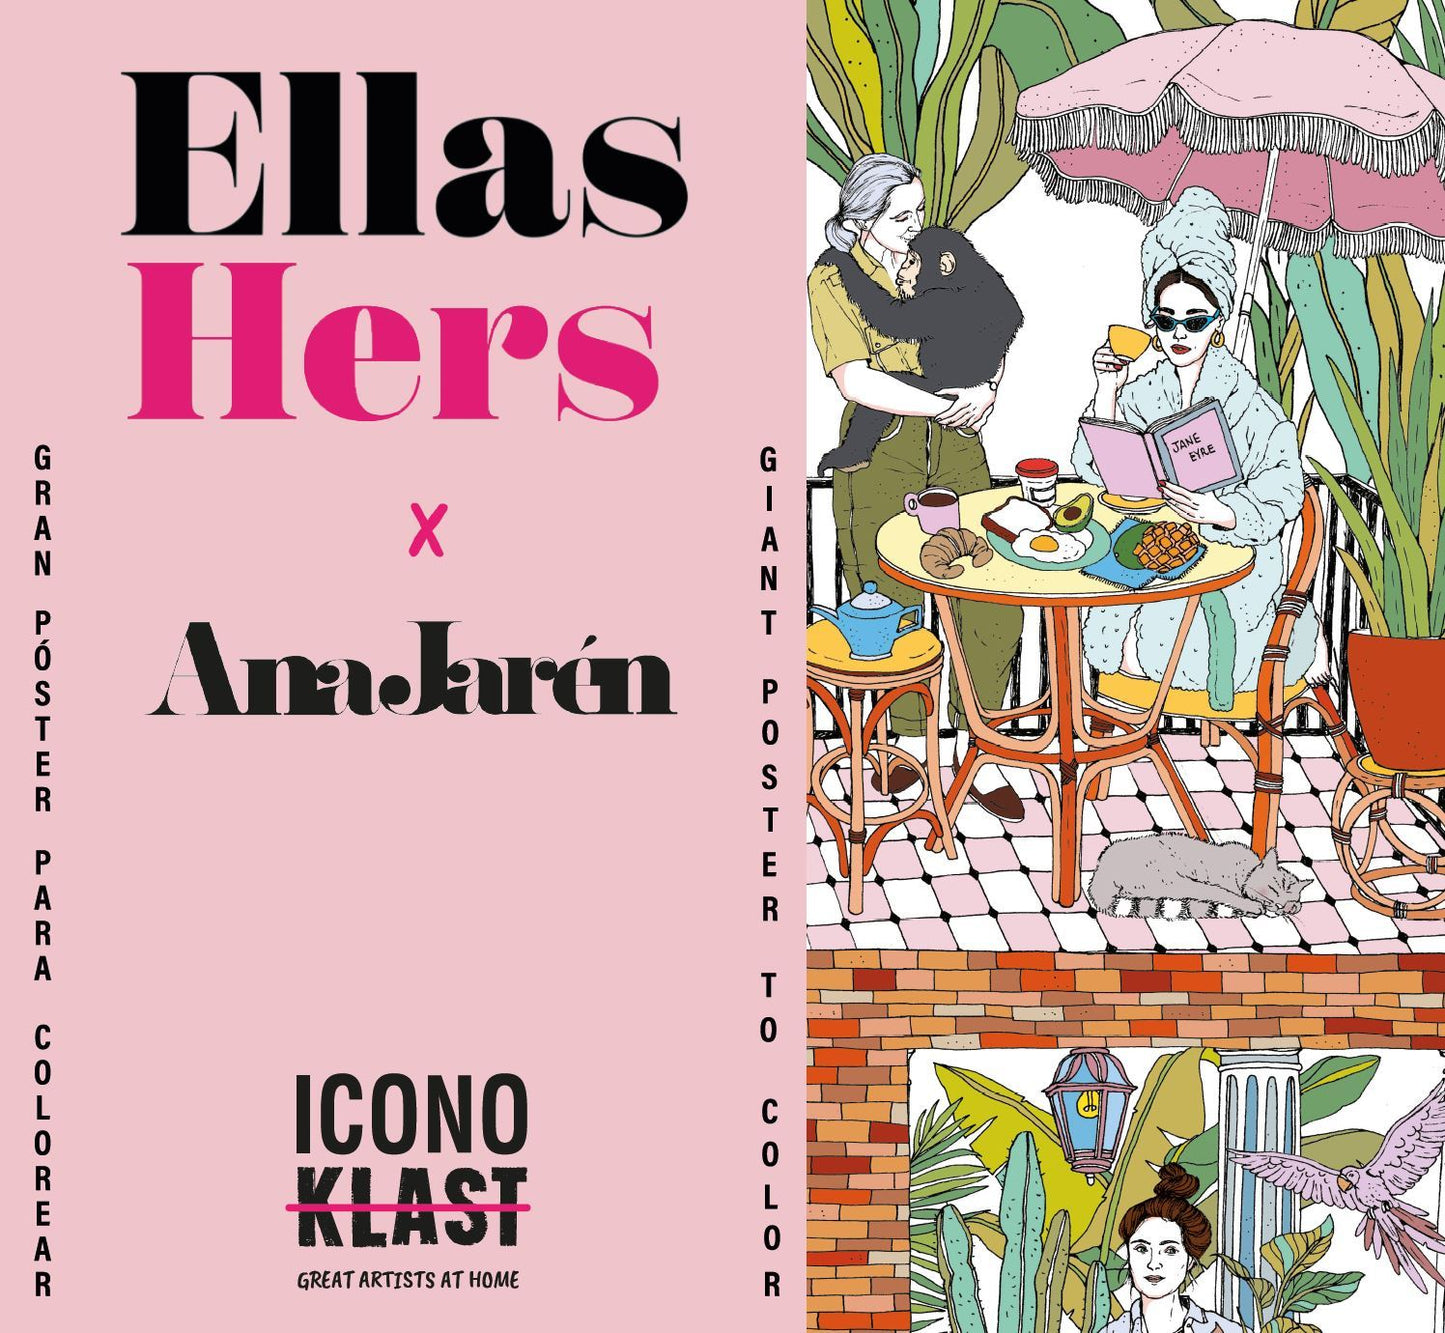 GIANT COLOURING POSTER "ELLAS"